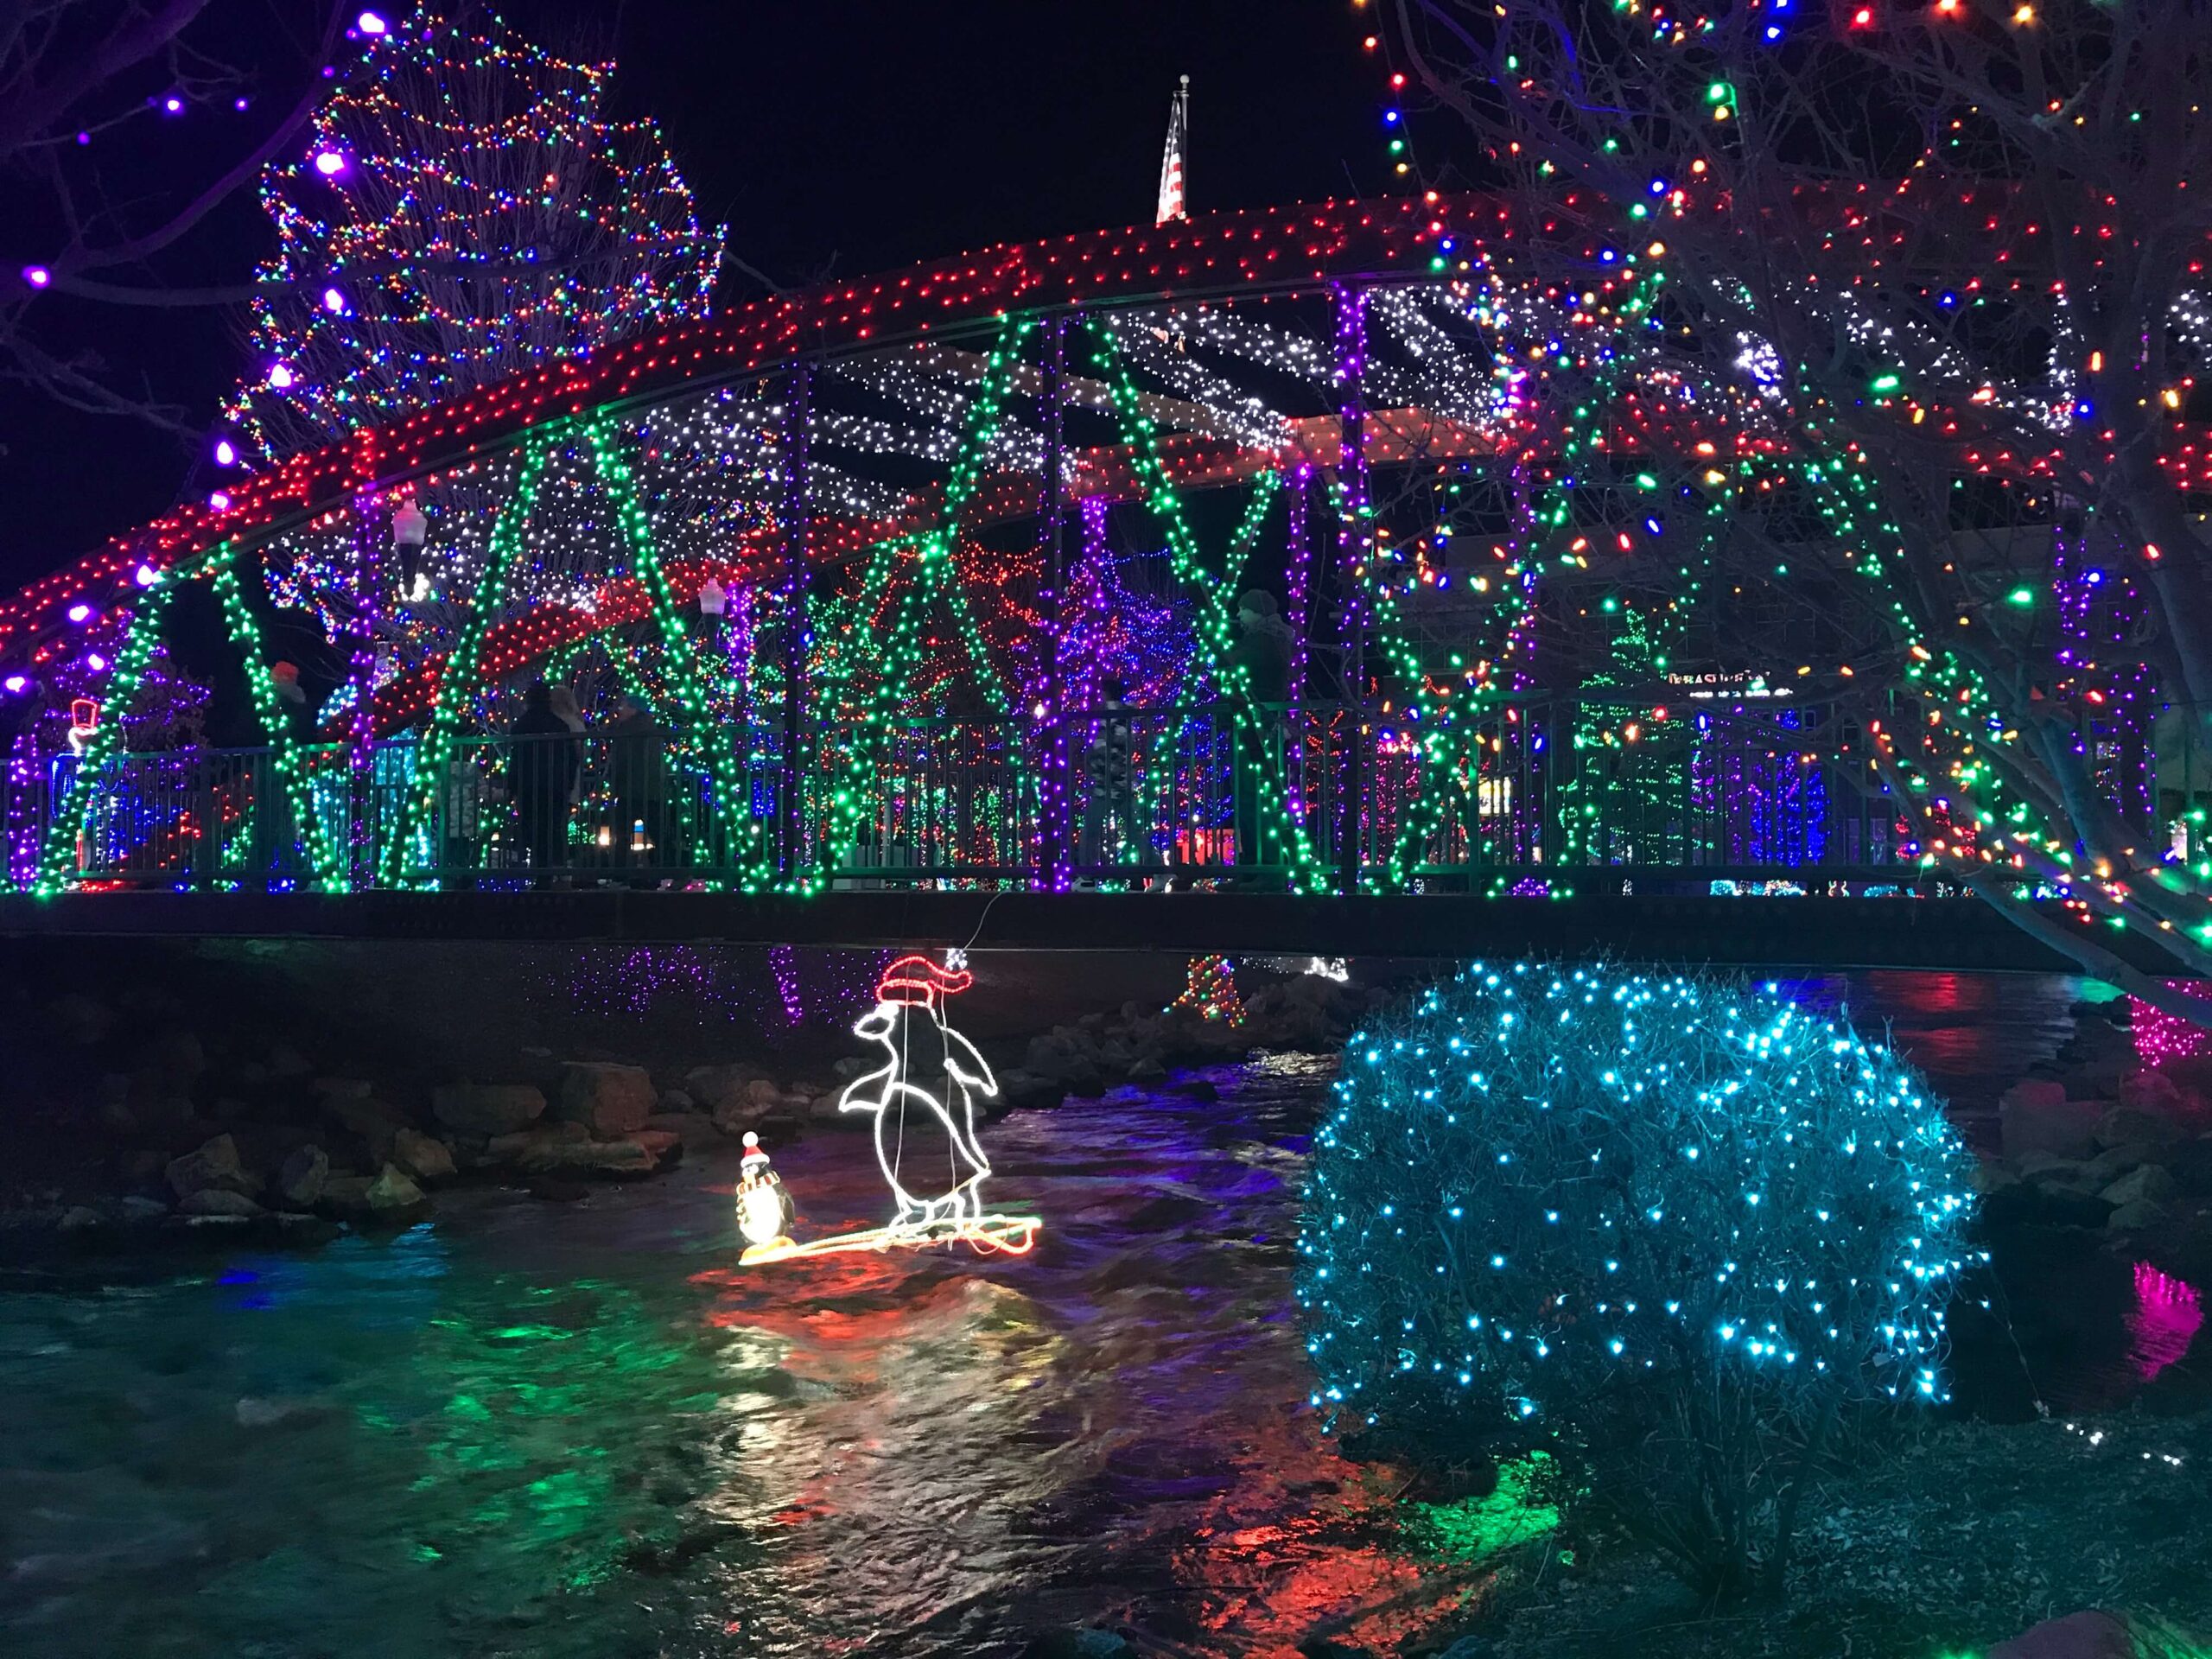 Scentsy Christmas Lights: Walk Through 45-Miles Of Lights In ID